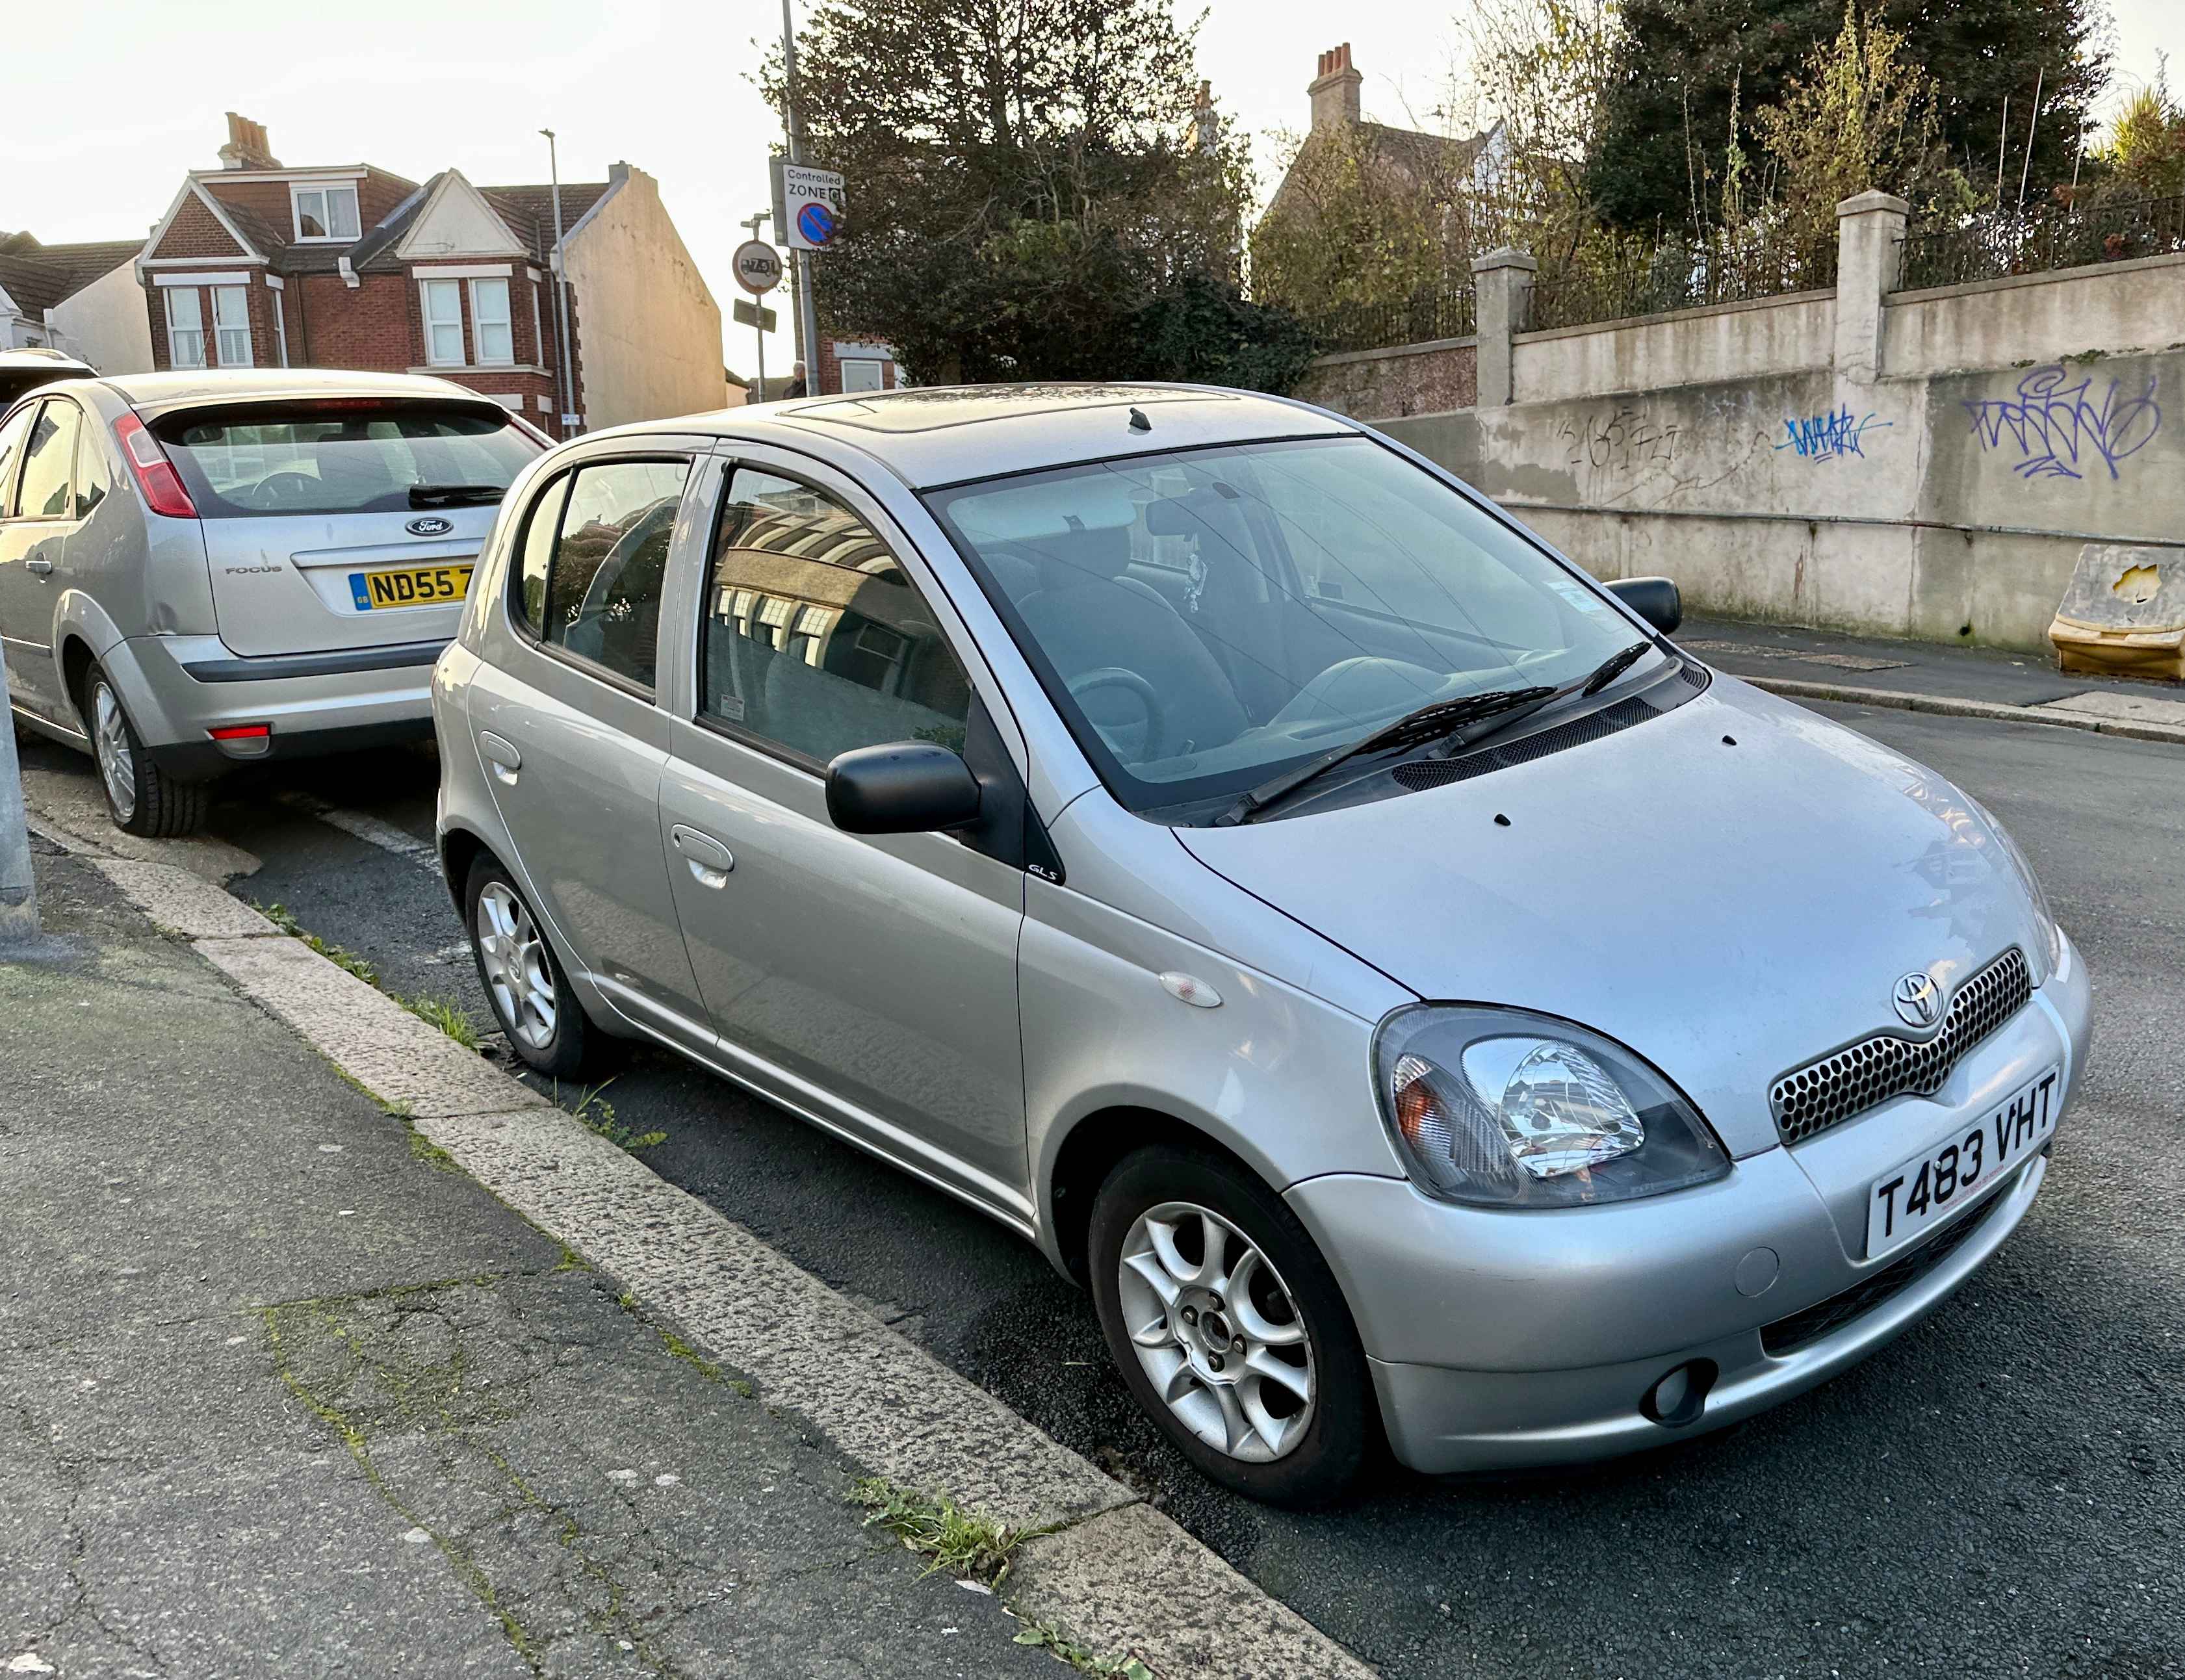 Photograph of T483 VHT - a Silver Toyota Yaris parked in Hollingdean by a non-resident. The ninth of fourteen photographs supplied by the residents of Hollingdean.